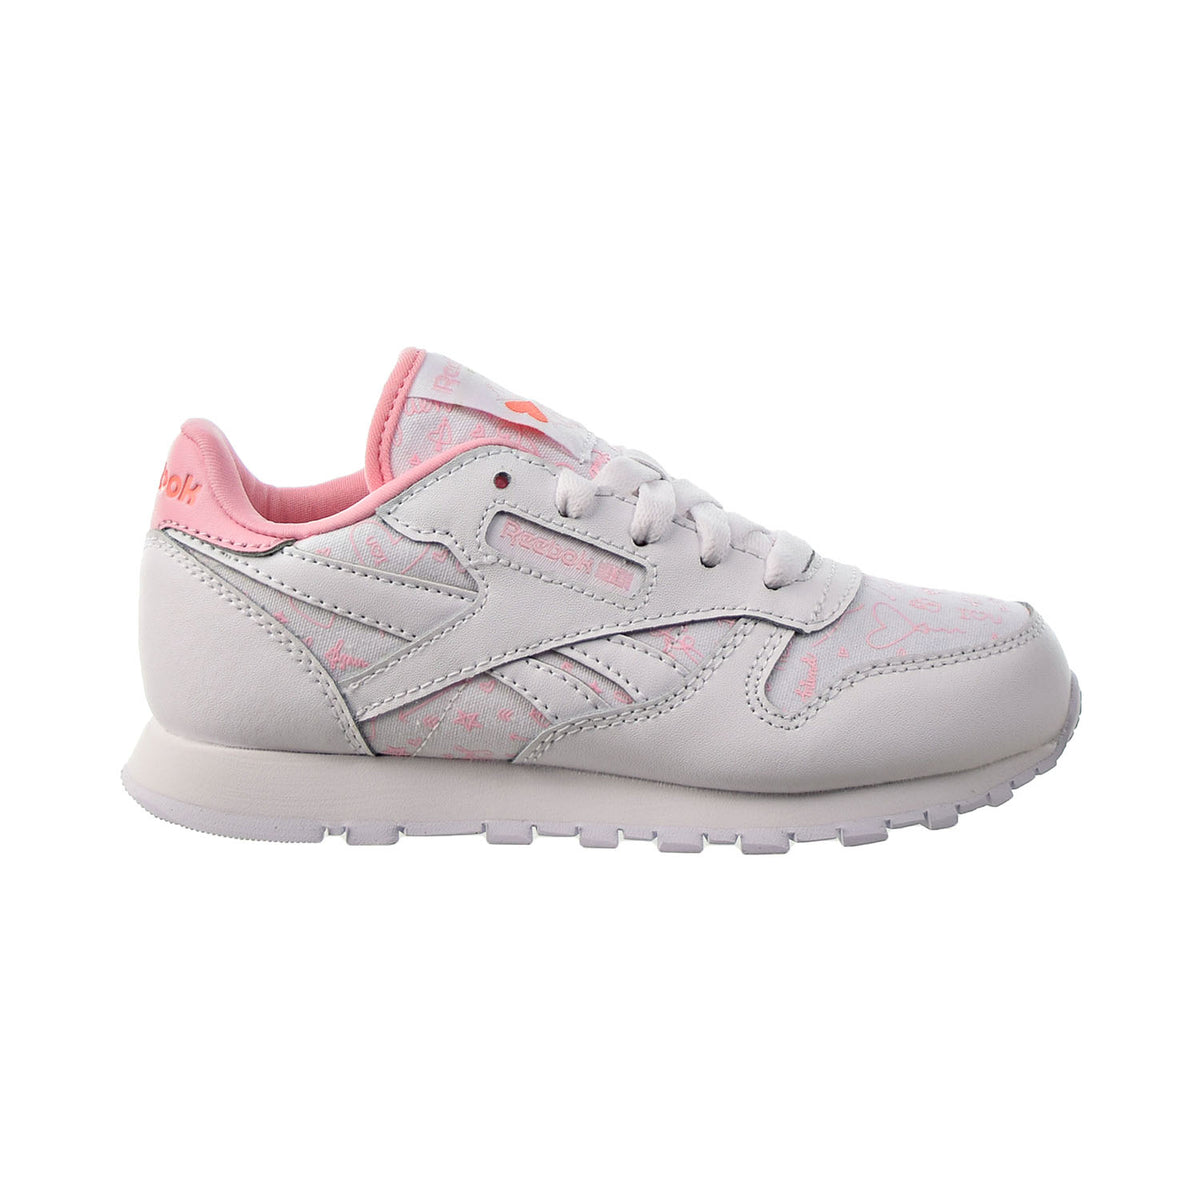 Reebok Classic Leather Little Kids' Shoes White-Pink Glow-Twisted